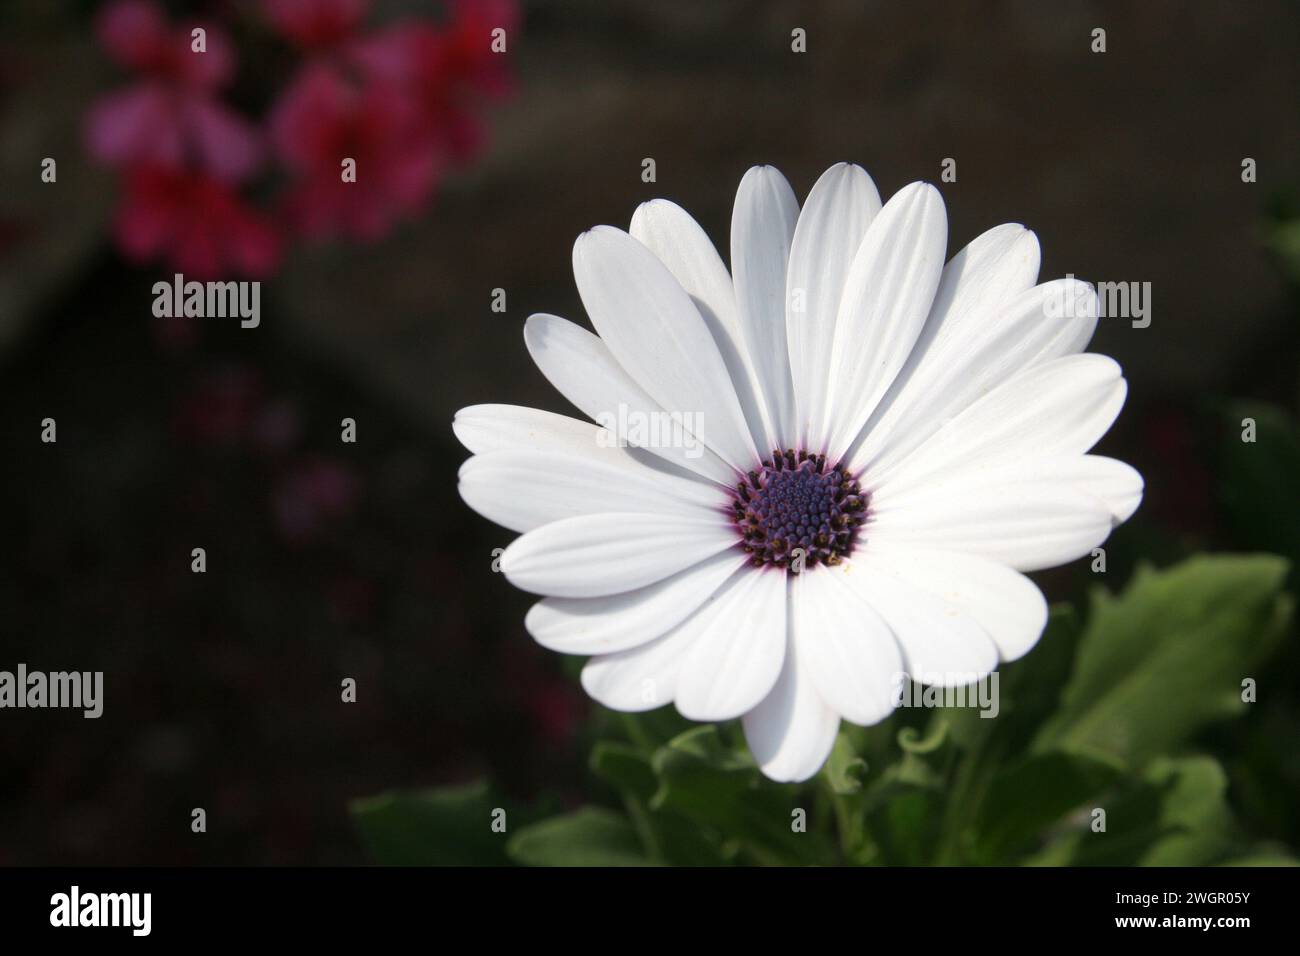 Osteospermum, African White Daisy flower, also known as African Daisy or Daisybush, the garden of the Benedictine Monastery of Zion in Jerusalem, Isra Stock Photo